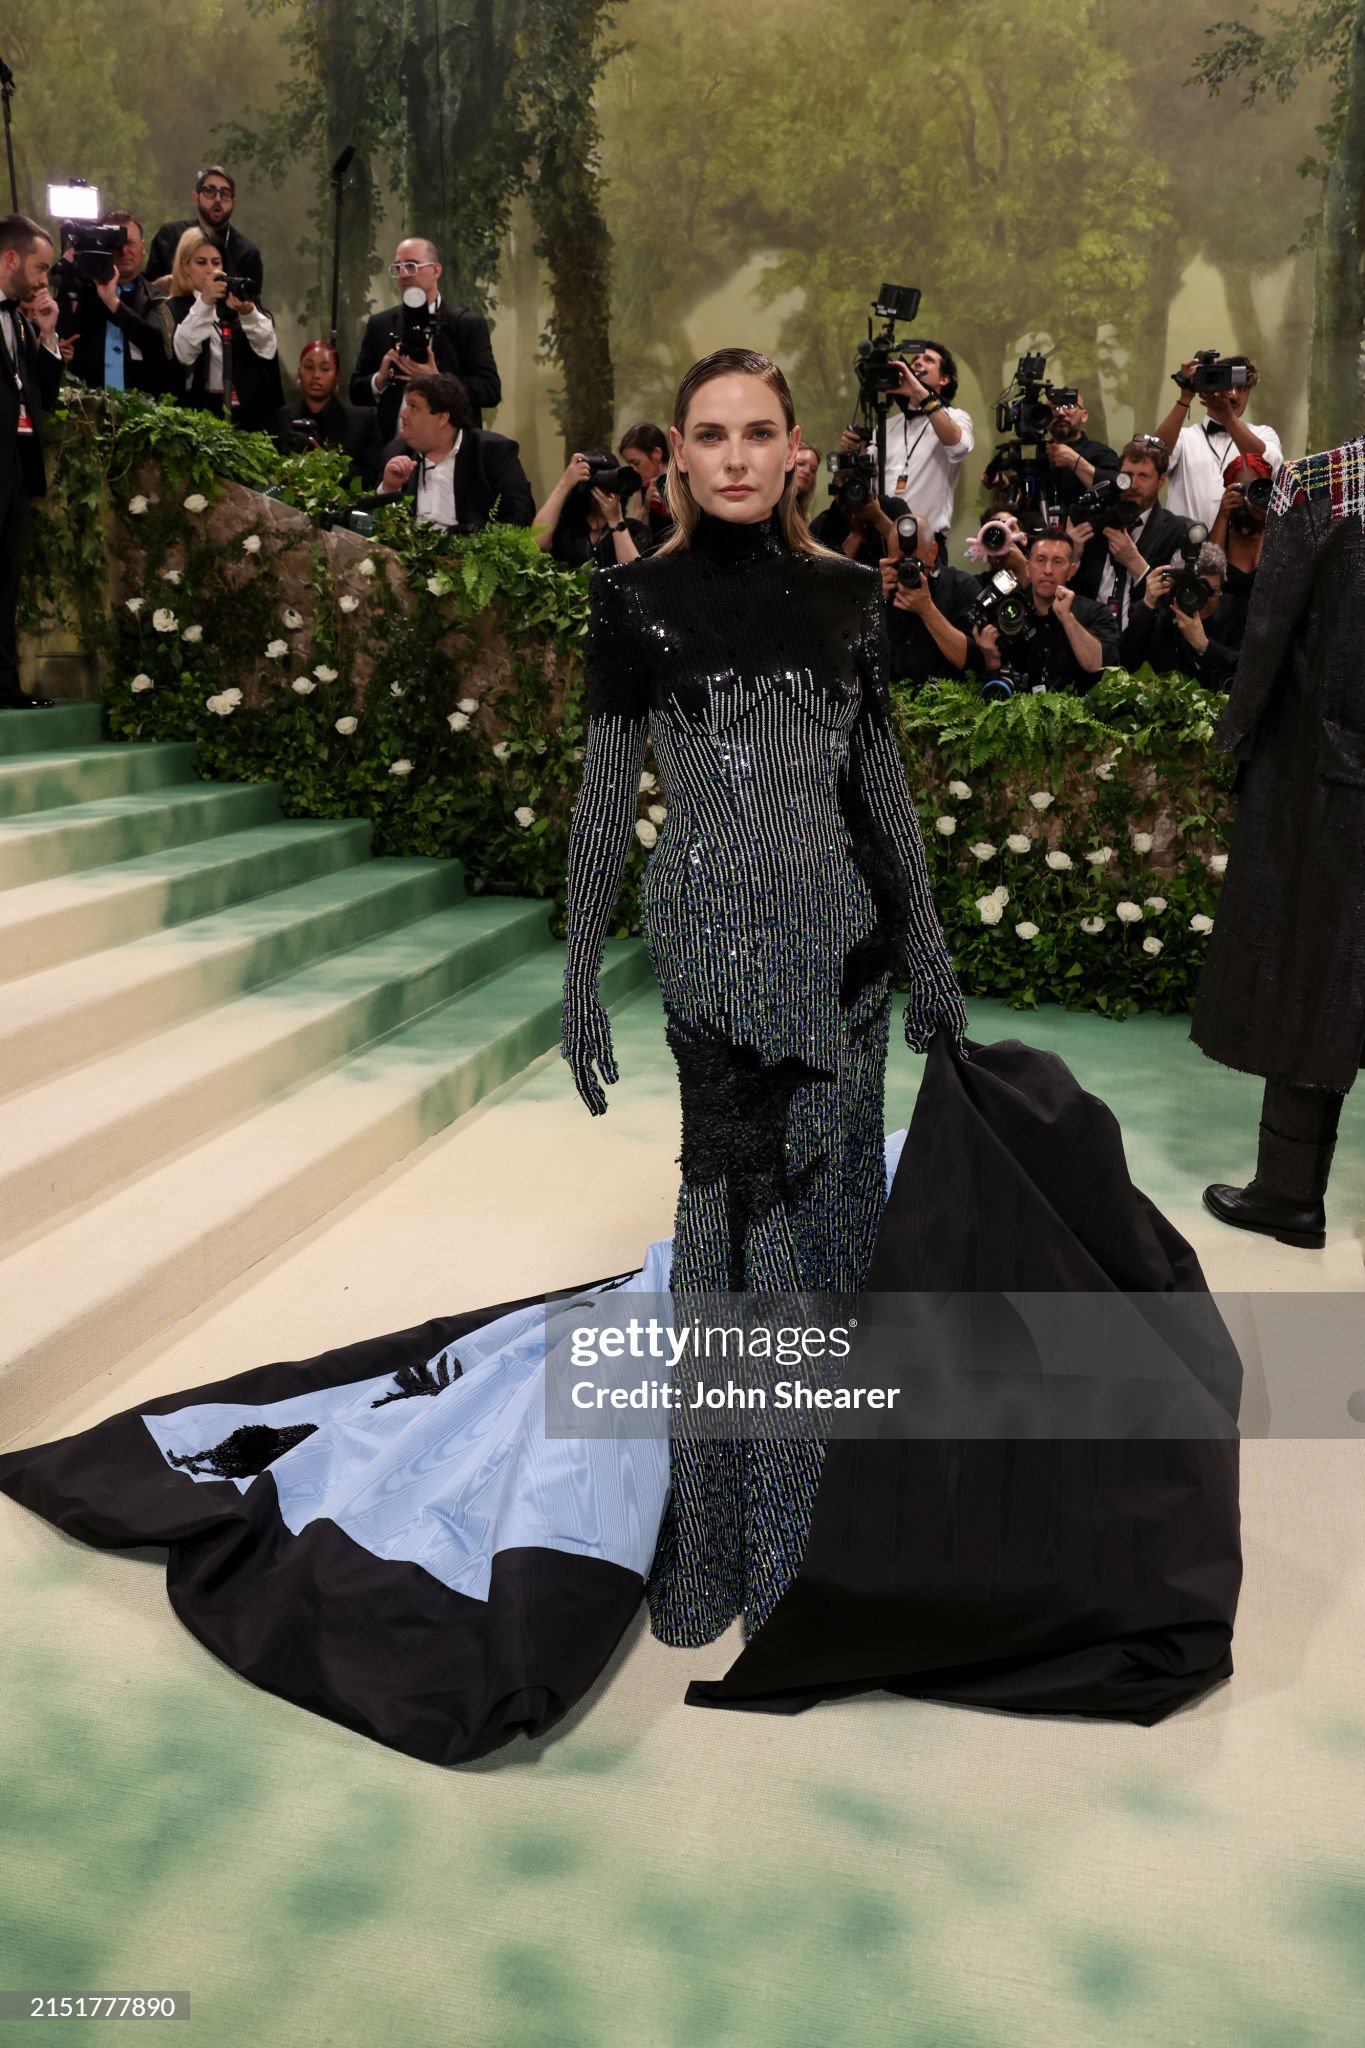 gettyimages-2151777890-2048x2048.jpg